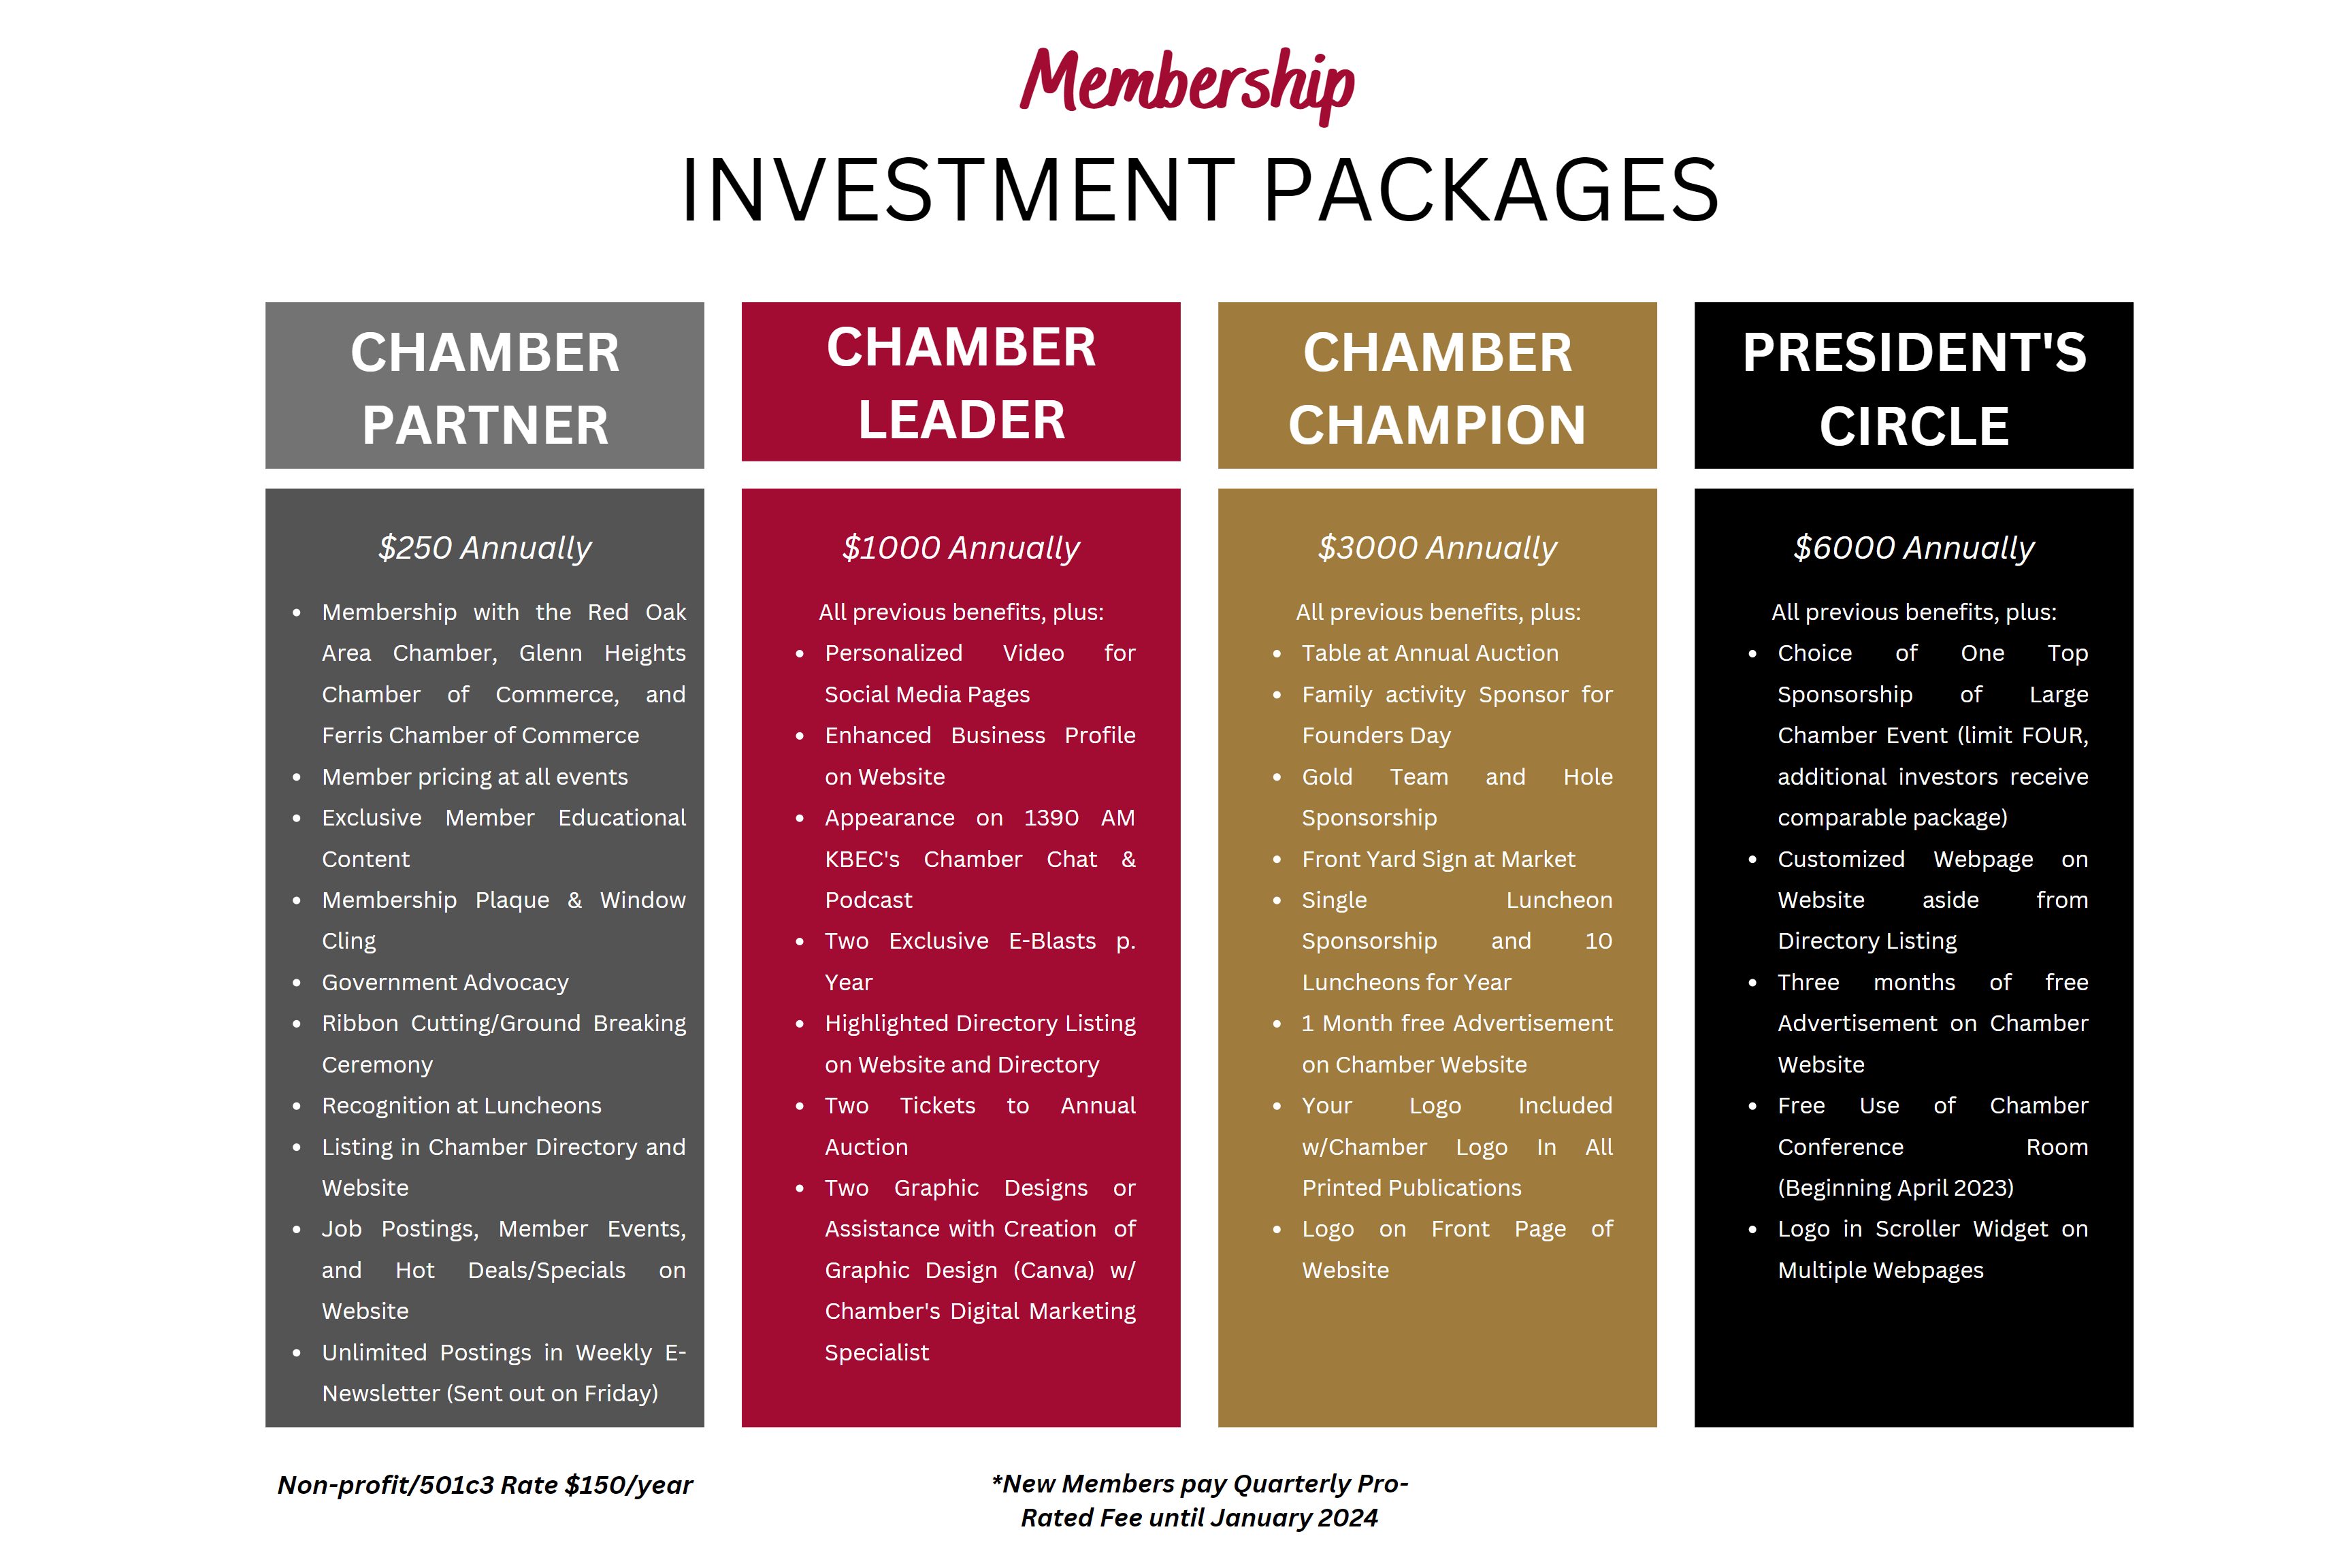 InvestmentPackages_2023